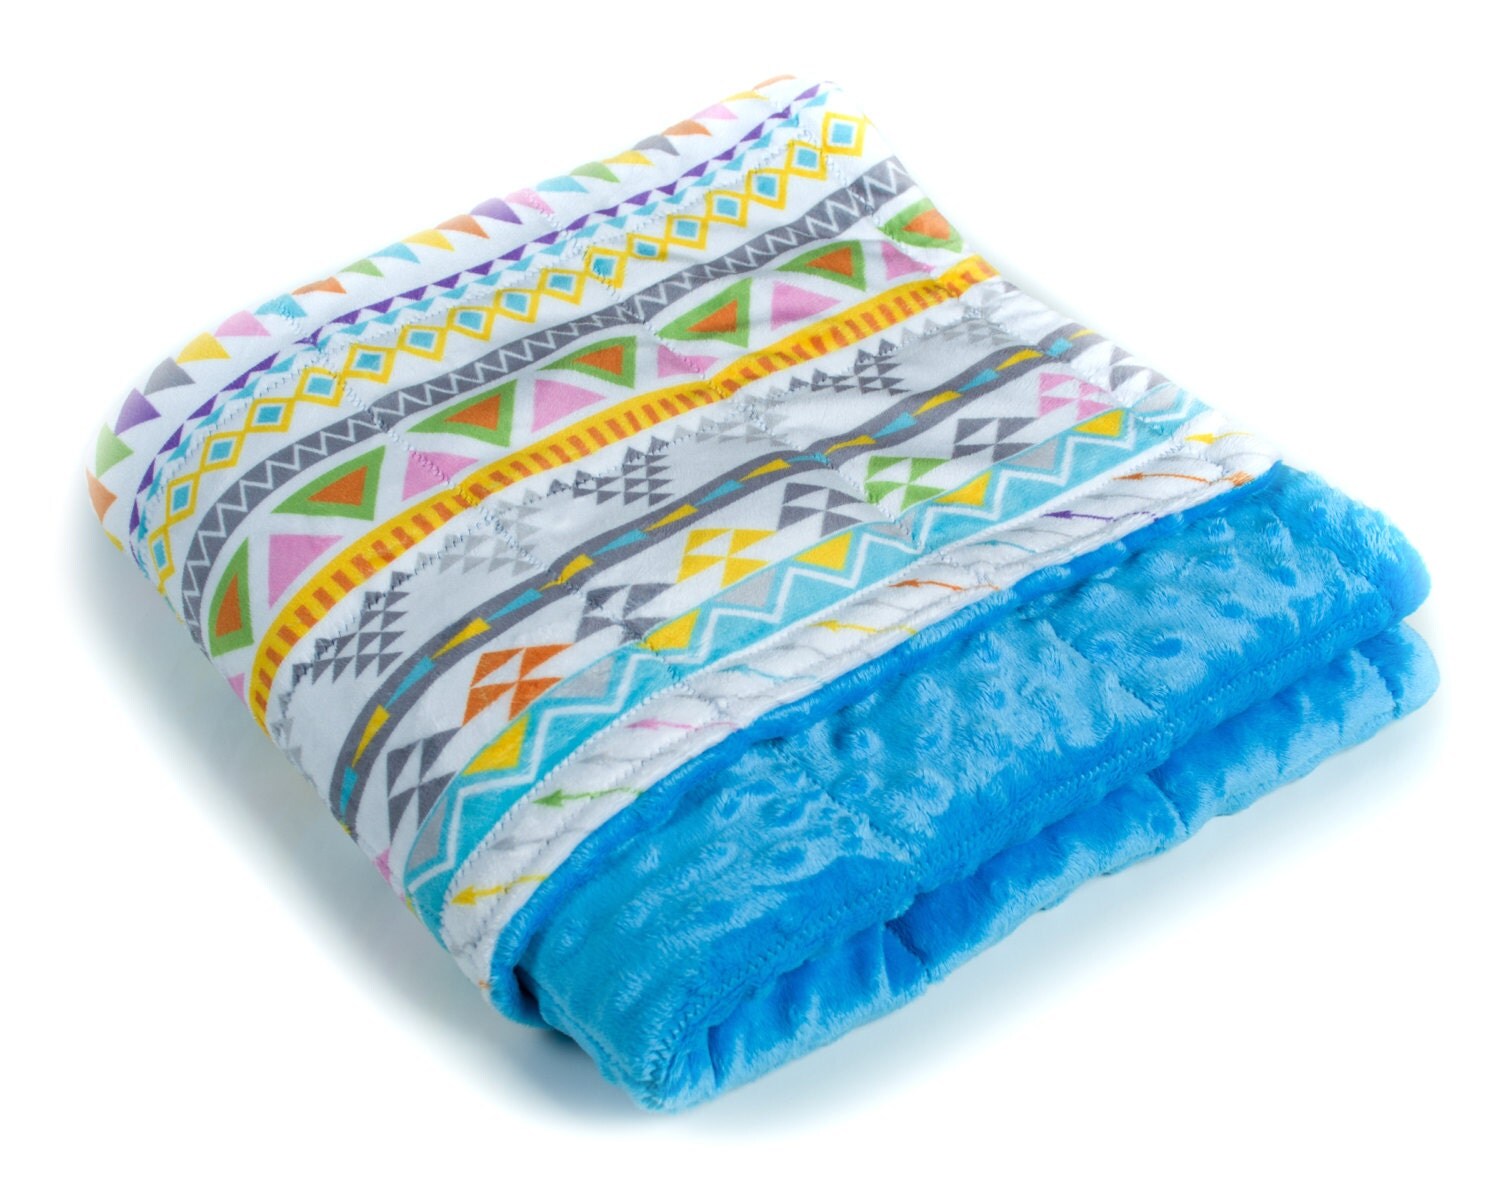 Double minky weighted blanket 24x36